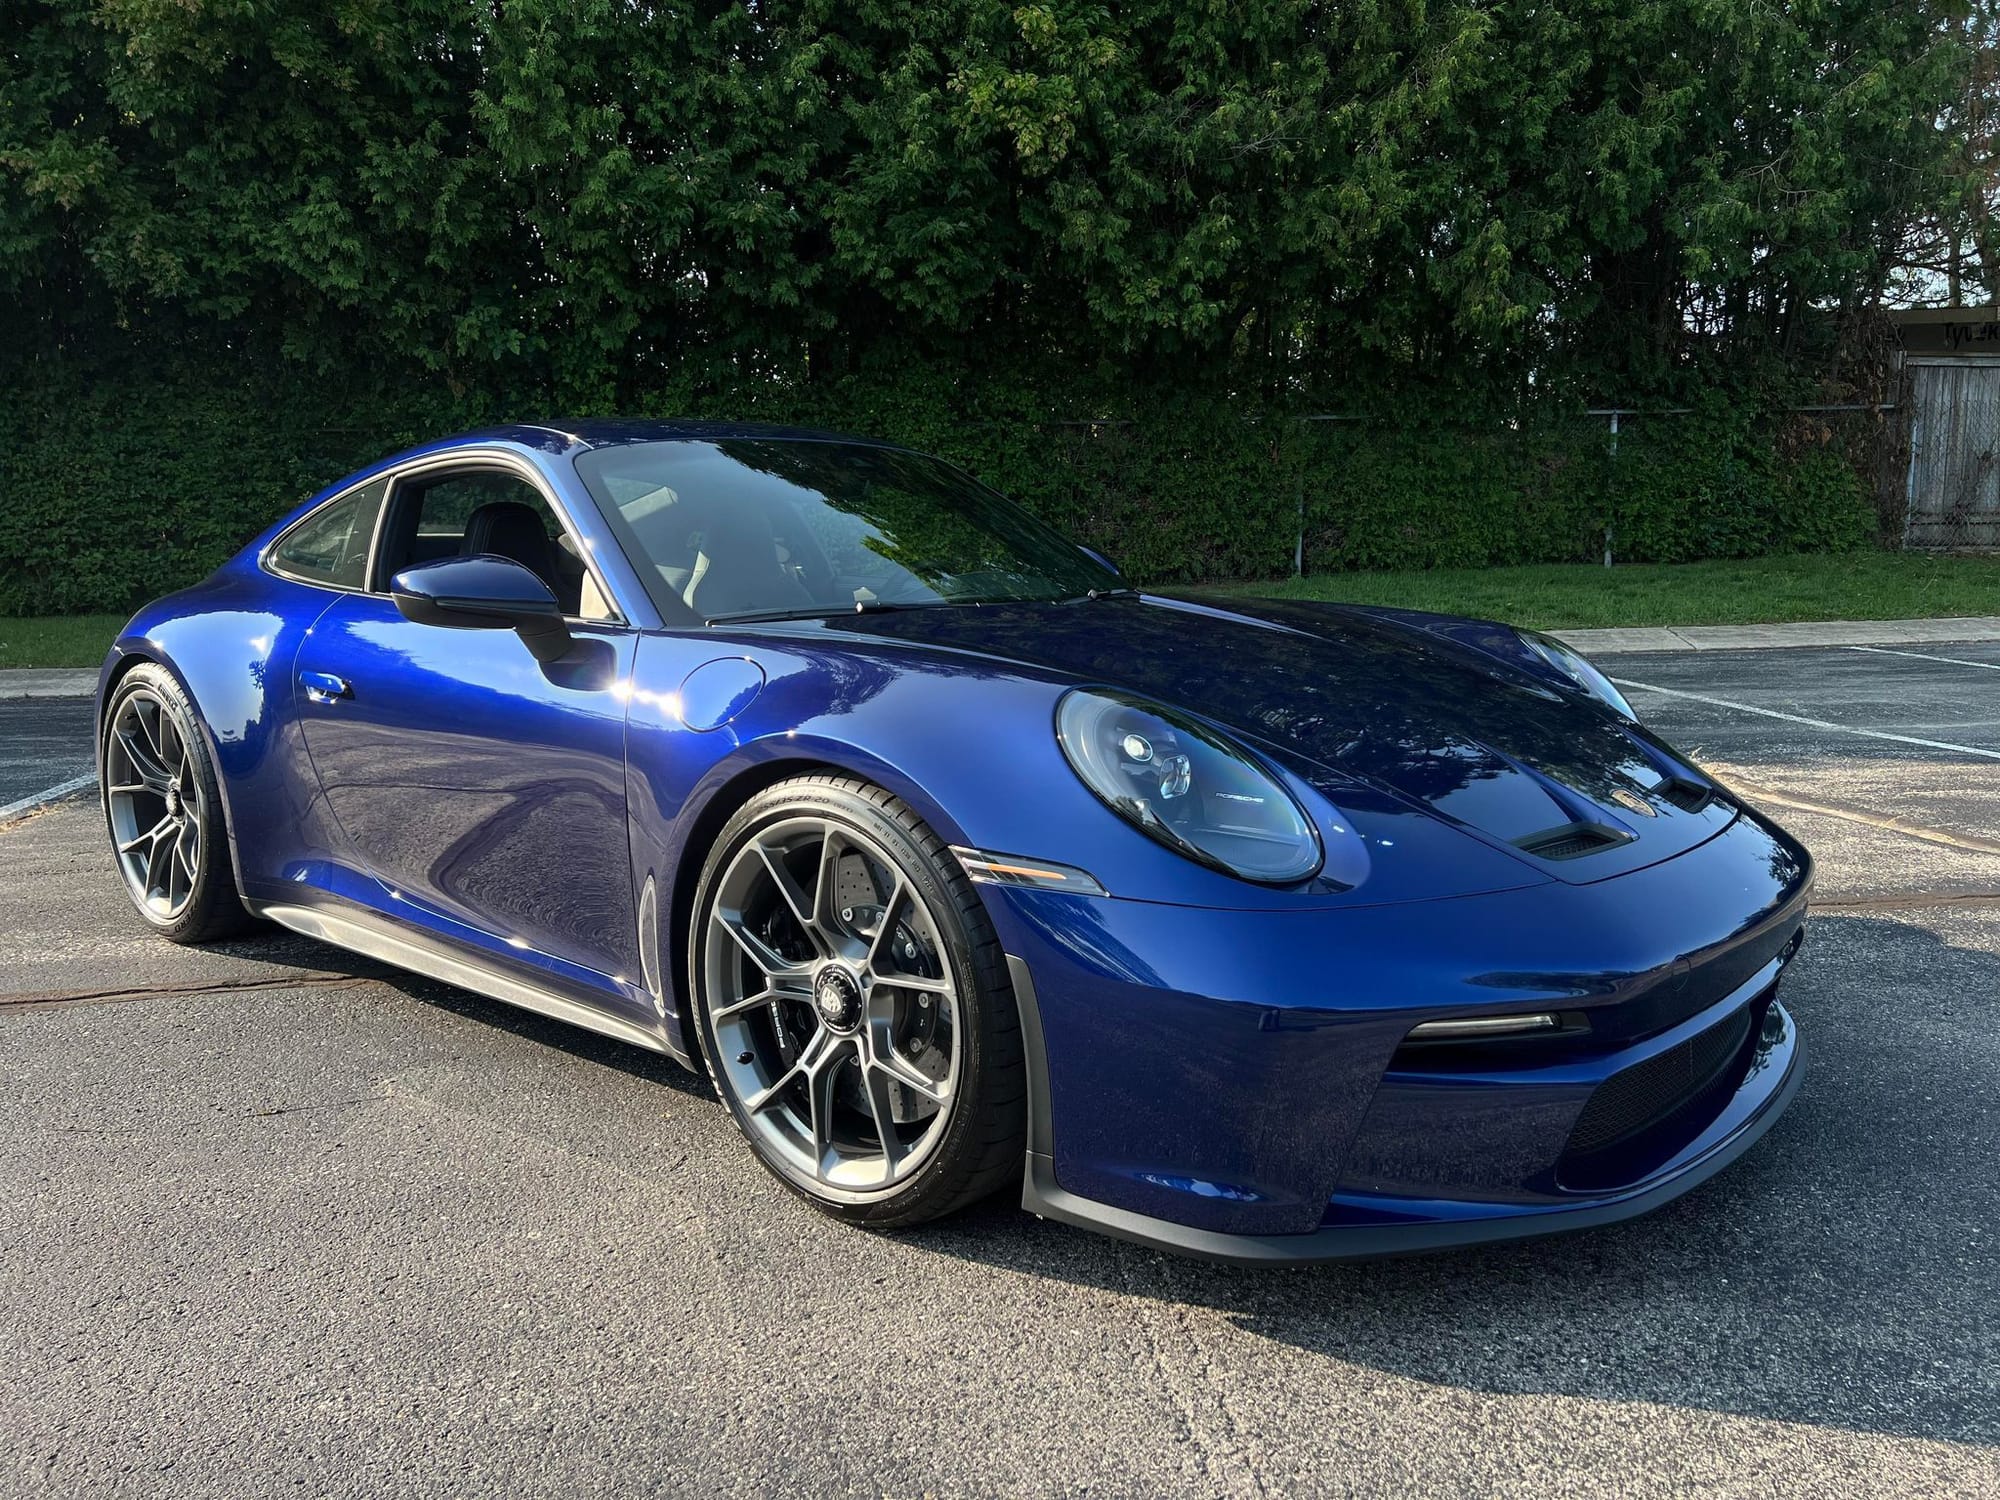 2022 Porsche 911 - 2022 GT3 Touring | Orig Owner | PCCB | FAL | PPF | 1850 miles - Used - VIN WP0AC2A95NS270972 - 1,850 Miles - 6 cyl - 2WD - Manual - Coupe - Blue - Detroit, MI 48236, United States